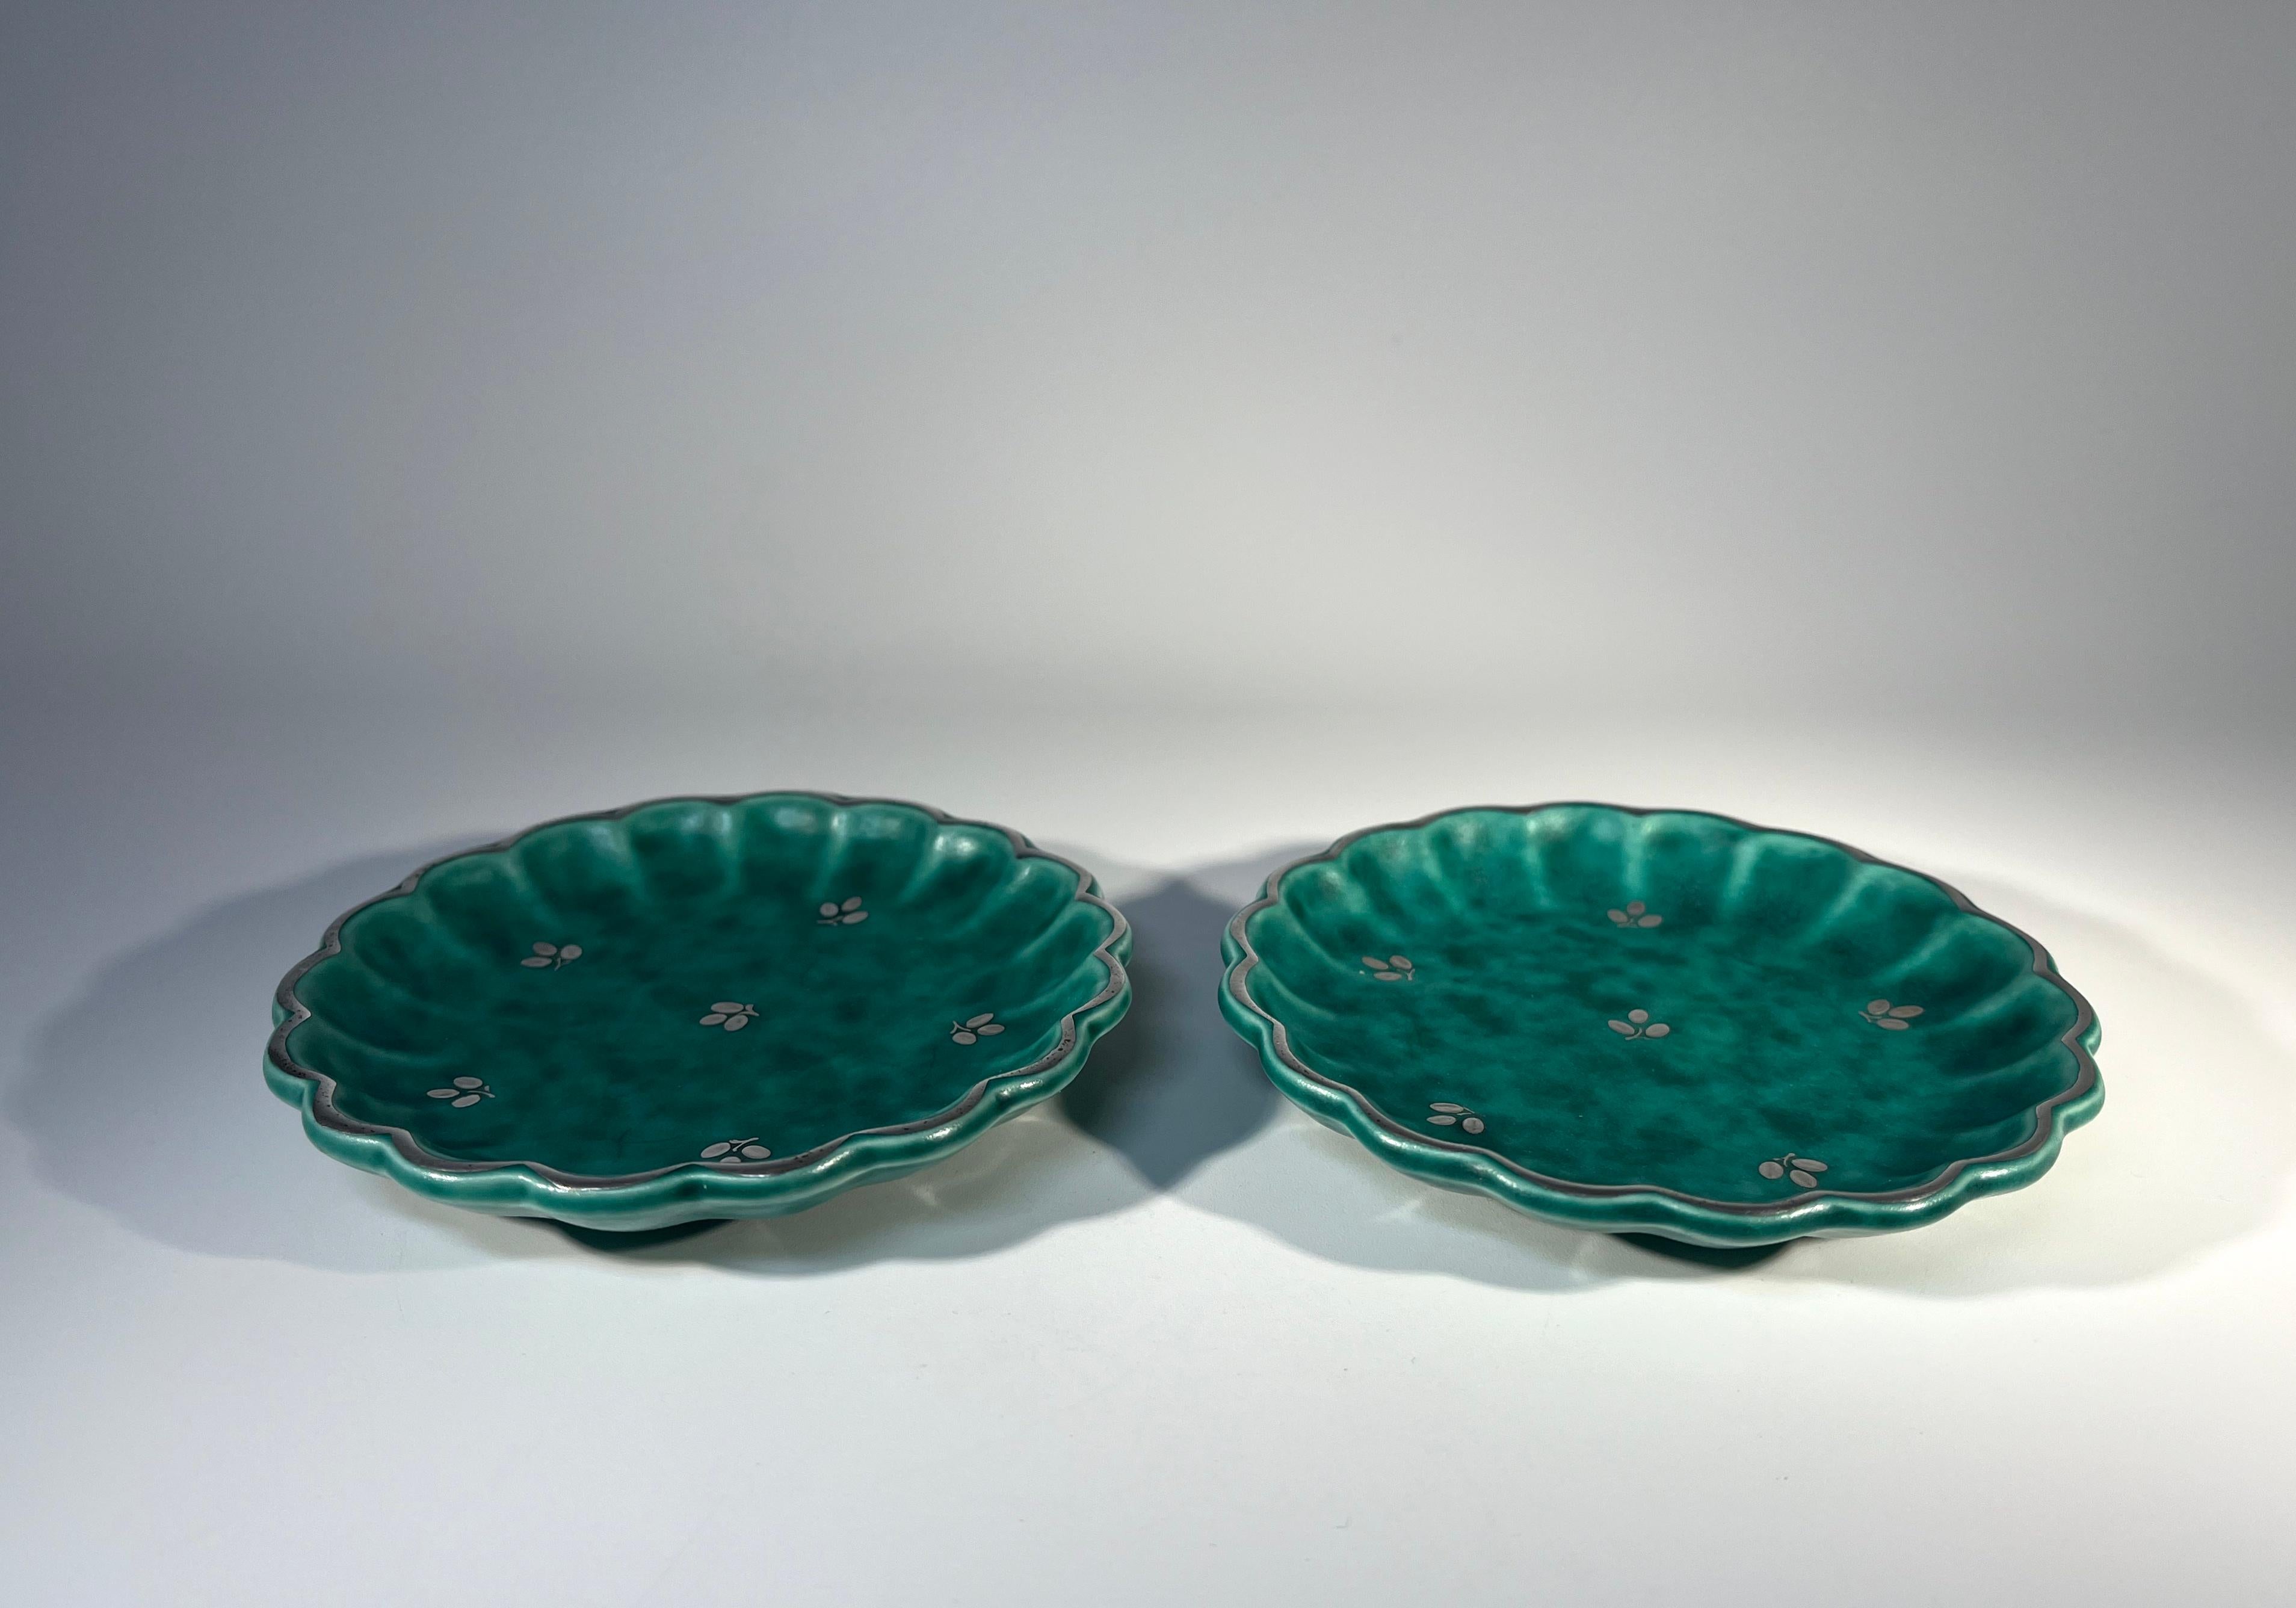 Pair Of Scalloped, Applied Silver Pin Trays, Wilhelm Kage, Argenta, Gustavsberg In Good Condition For Sale In Rothley, Leicestershire